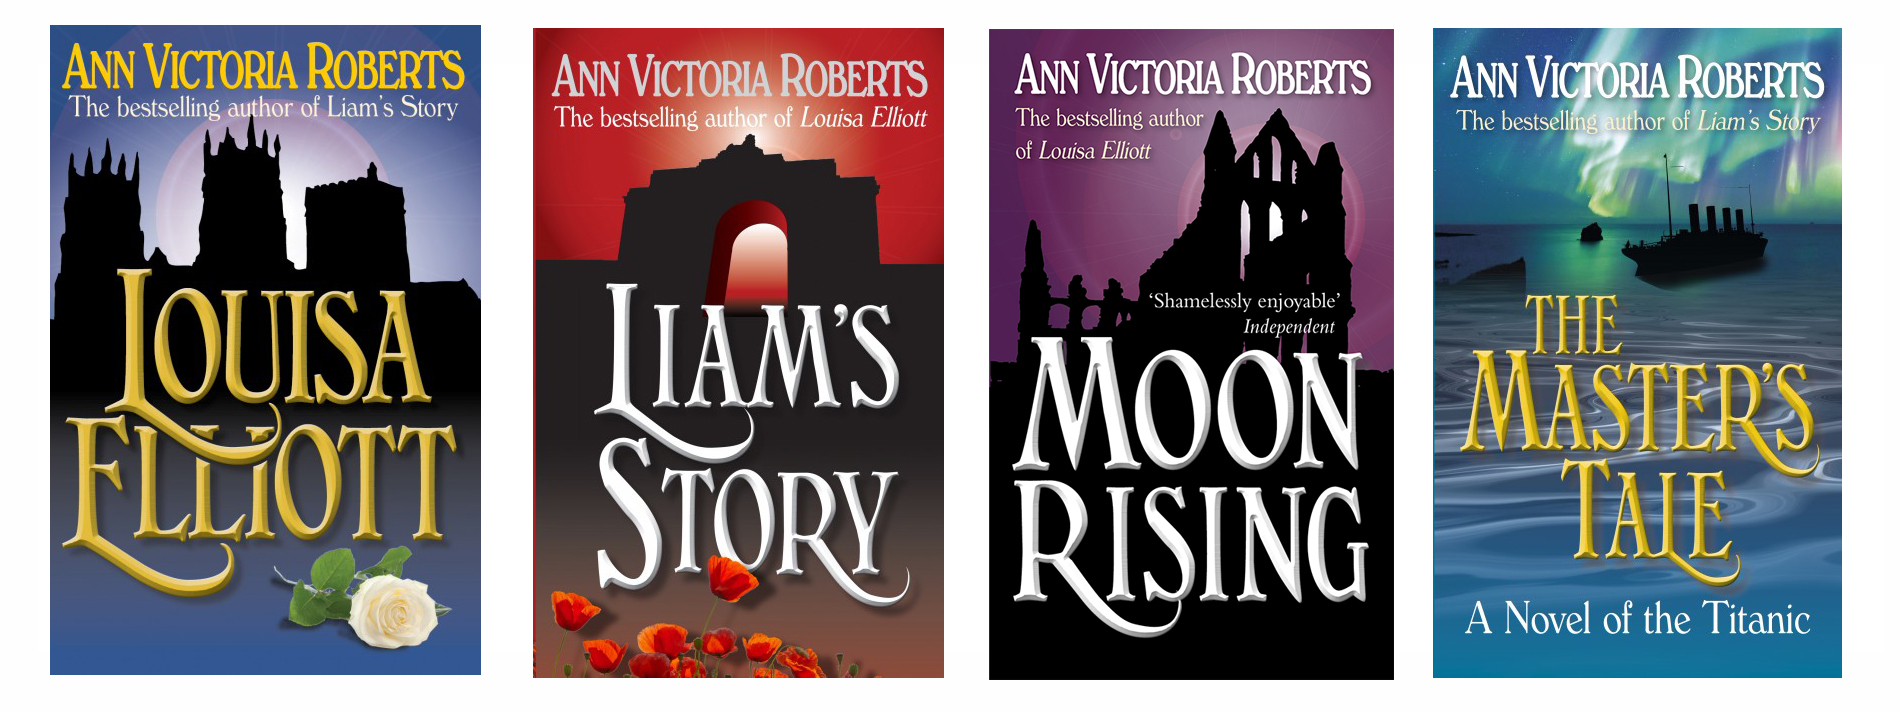 Covers for Ann Victoria Roberts